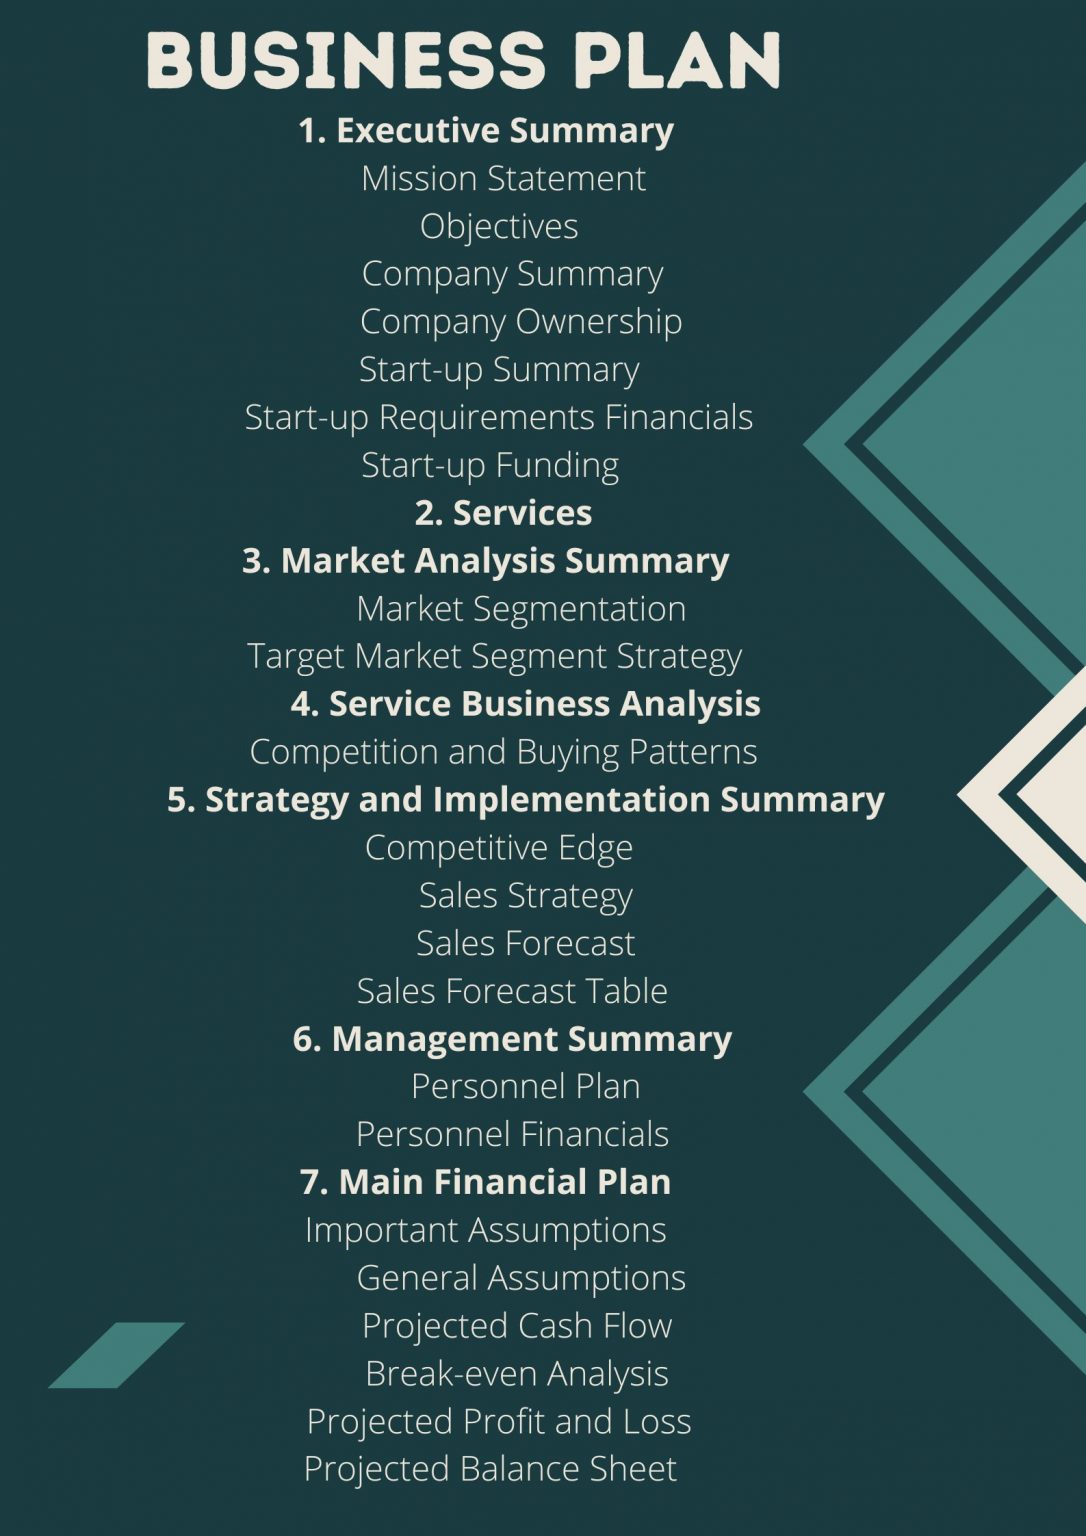 business plan sections uk